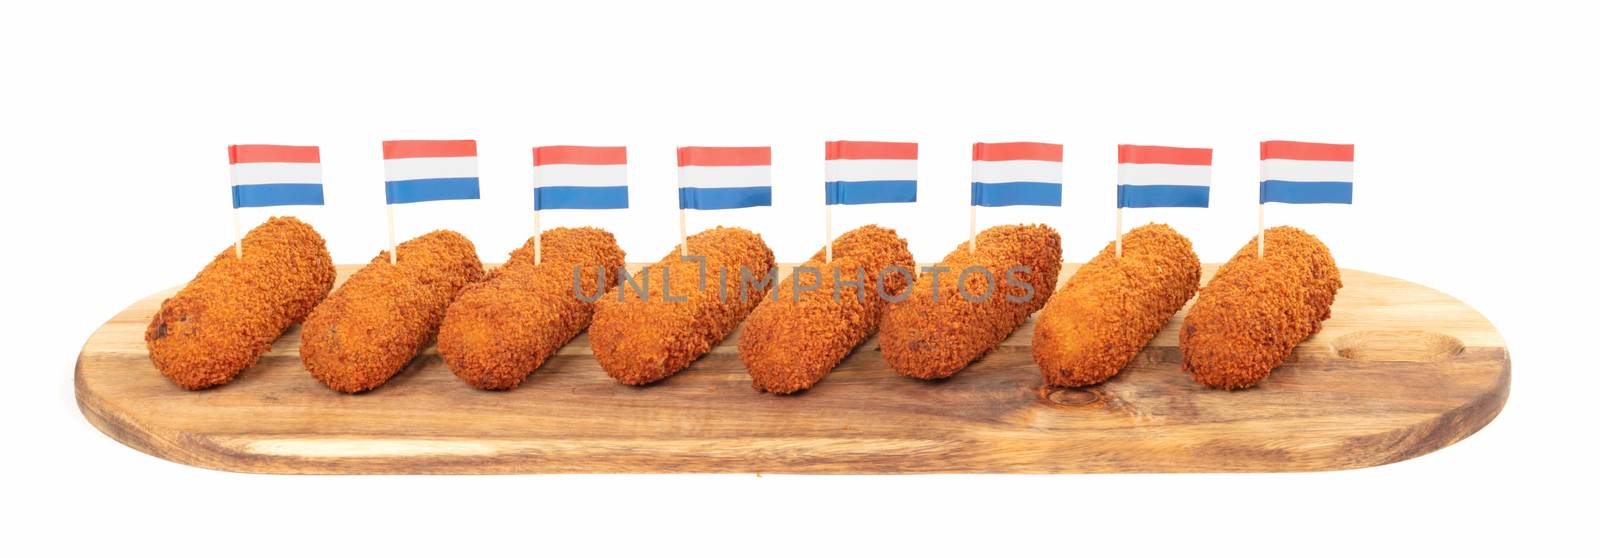 Brown crusty dutch kroketten on a serving tray isolated  by michaklootwijk